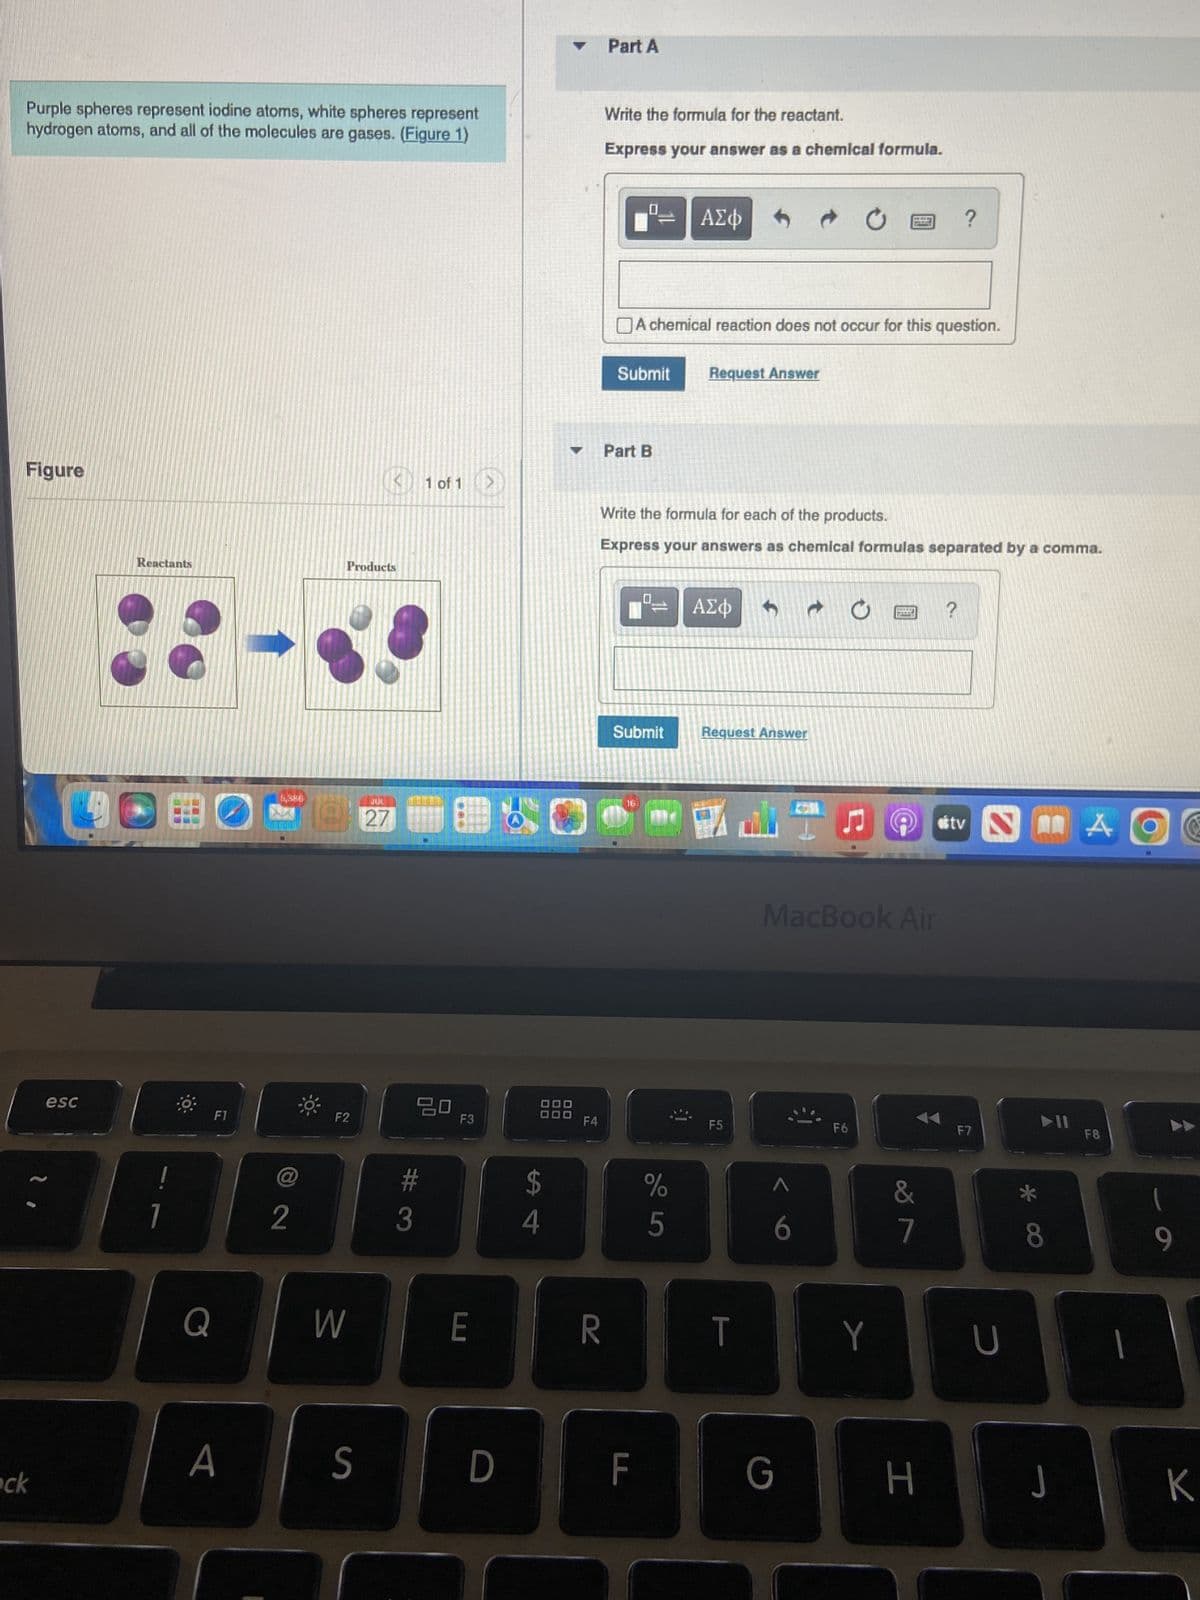 Purple spheres represent iodine atoms, white spheres represent
hydrogen atoms, and all of the molecules are gases. (Figure 1)
Figure
ock
esc
Reactants
7
F1
Q
A
@
2
F2
3
Products
KD
S
JUL
27
#
3
1 of 1
20
F3
E
S
D
$
4
F4
Part A
Write the formula for the reactant.
Express your answer as a chemical formula.
SRED
R
2015
Part B
Submit Request Answer
A chemical reaction does not occur for this question.
Submit
ΑΣΦ
Write the formula for each of the products.
Express your answers as chemical formulas separated by a comma.
16
F
%
5
ΑΣΦ
Request Answer
F5
T
G
www
C
F6
MacBook Air
Y
MEET
WARN
&
7
?
H
?
otv I A
F7
U
8
J
F8
1
(
9
K